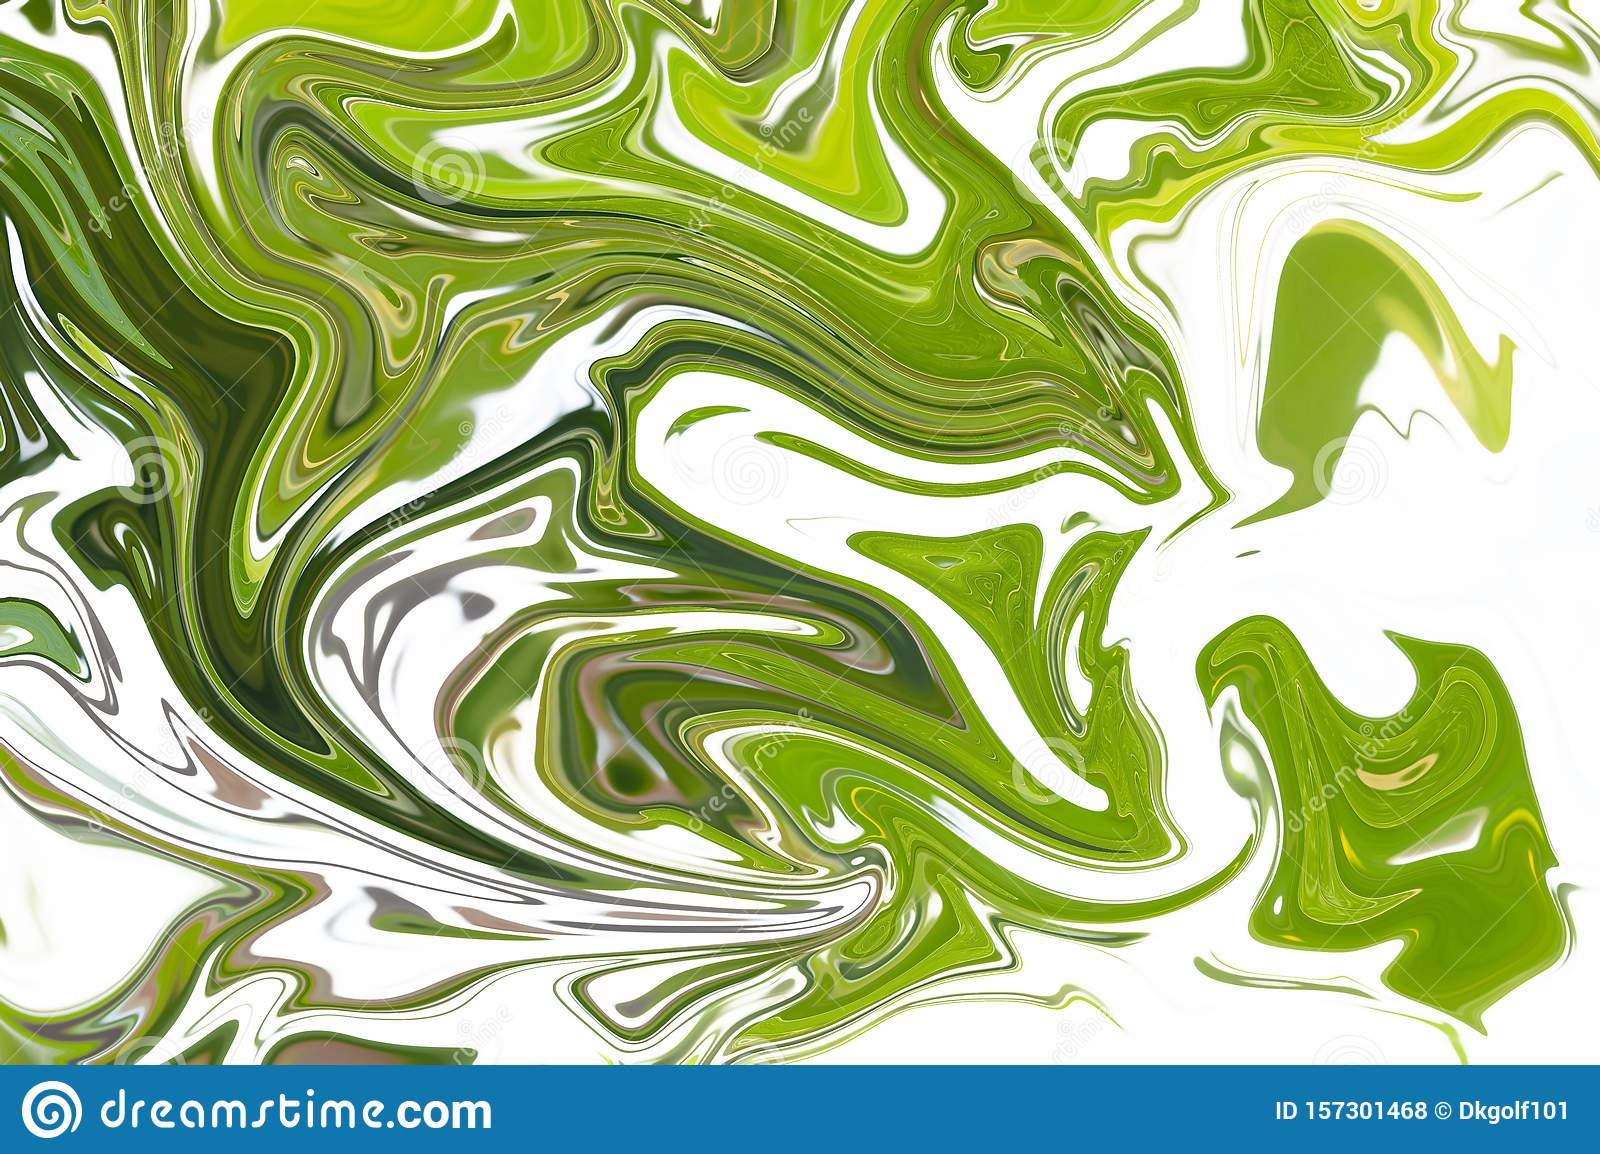 Abstract green and white liquid marble swirl texture background stock photo